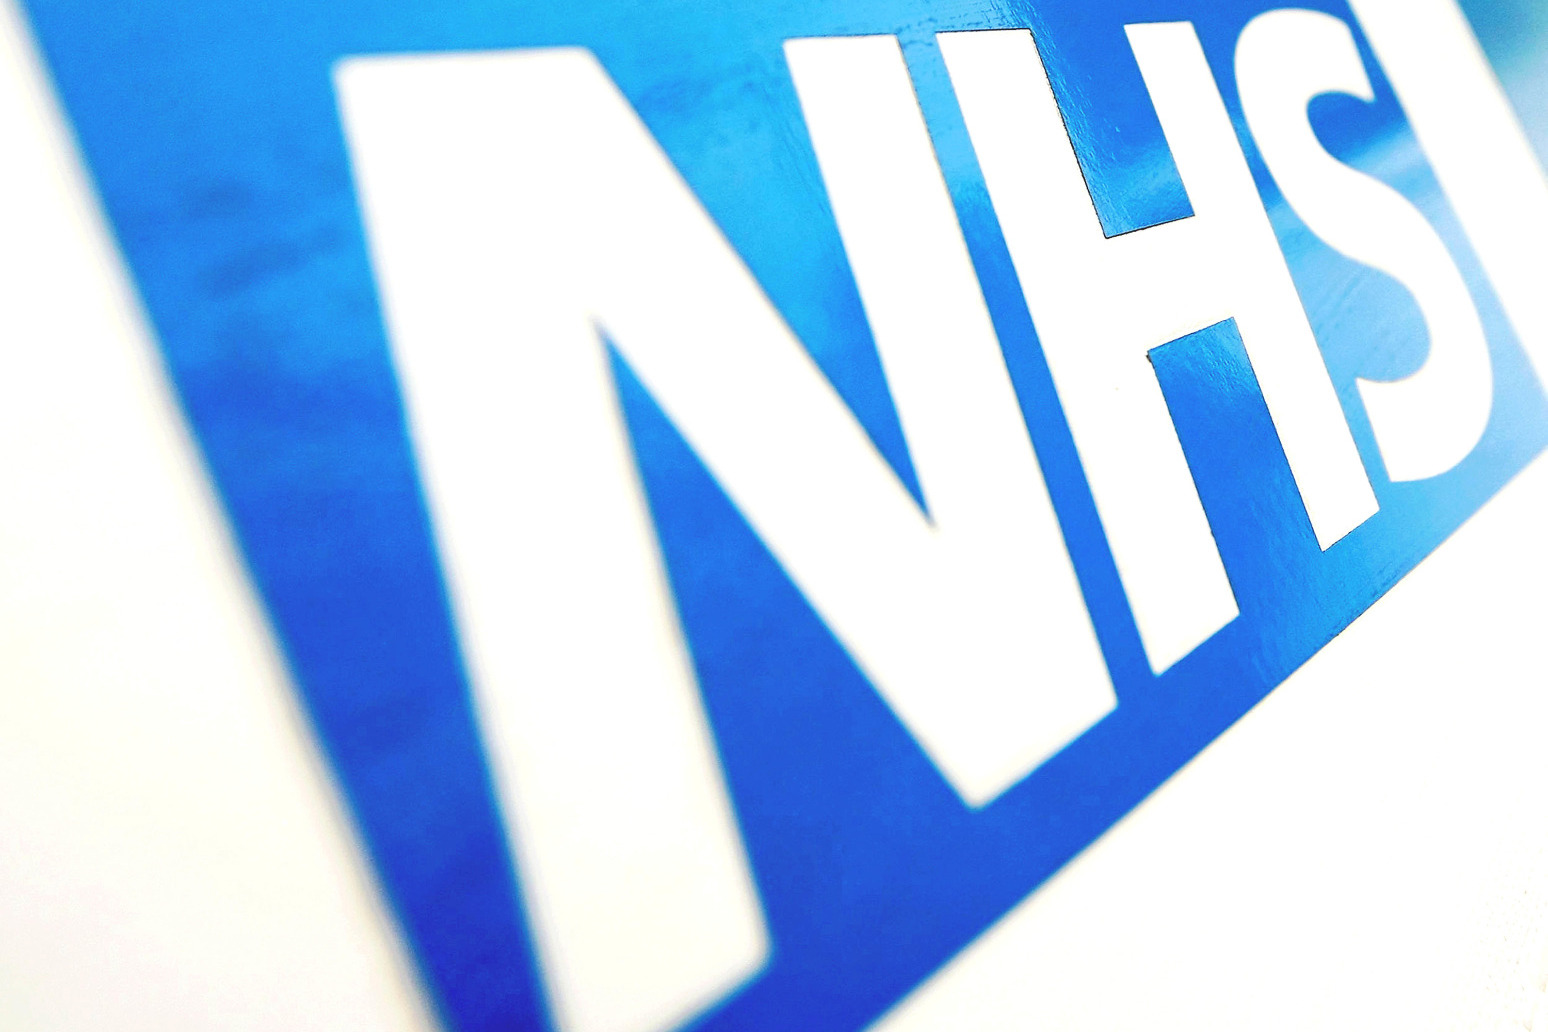 PM to host NHS Recovery Forum with health and care experts in Downing Street 